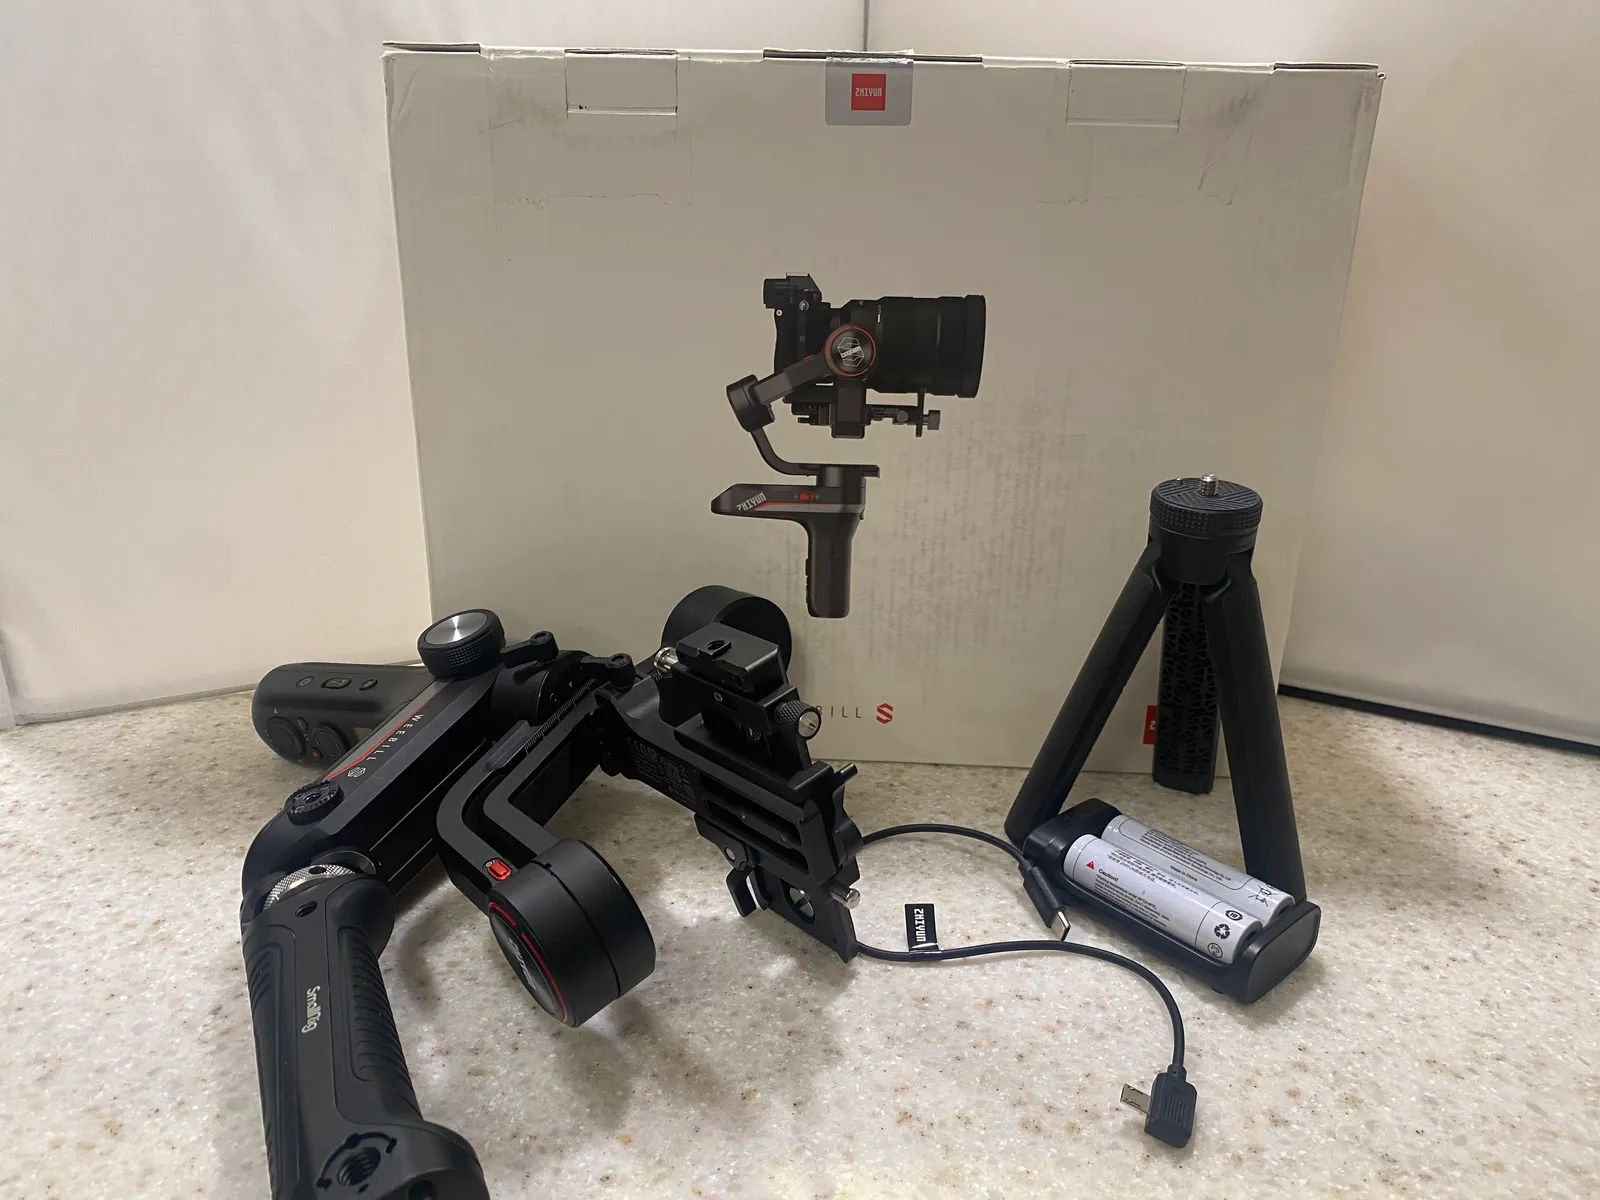 Barely used Zhiyun-Tech WEEBILL-S Handheld Gimbal Stabilizer From